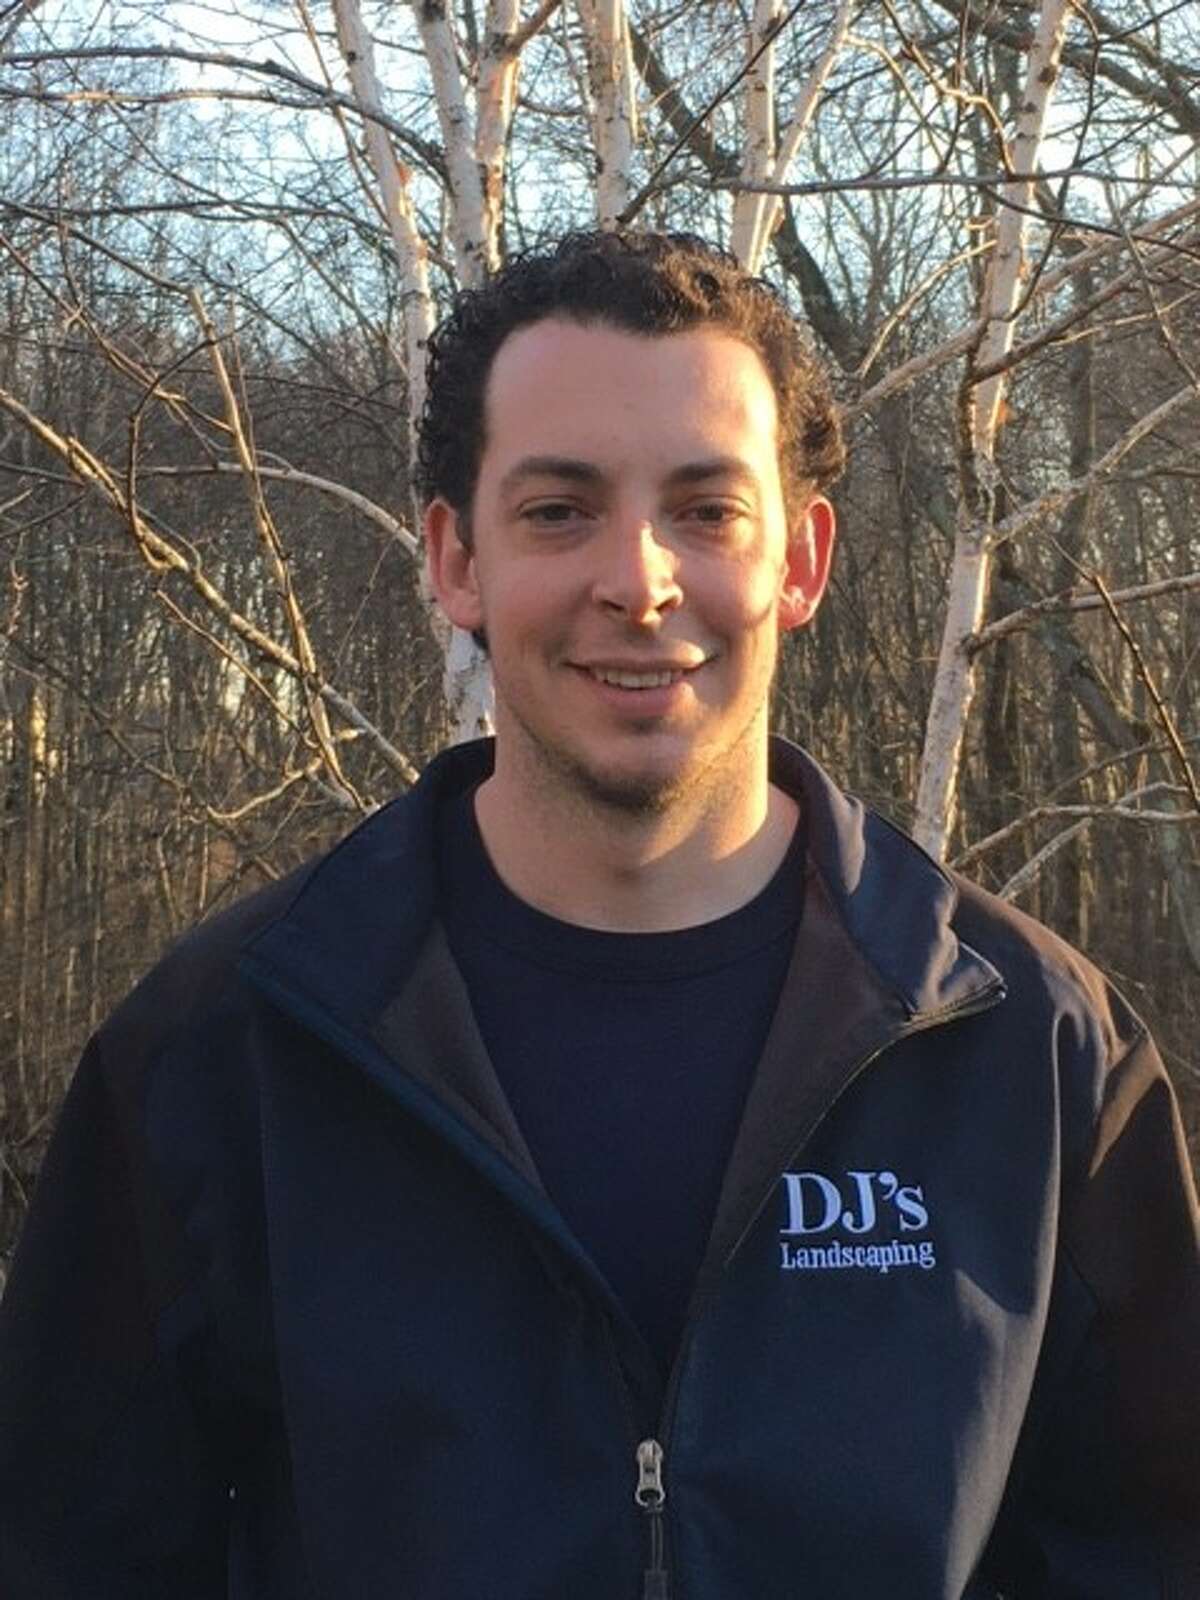 D.J Reich, a 2005 Trumbull High School graduate, founded D.J.’s Landscaping in May 2006.